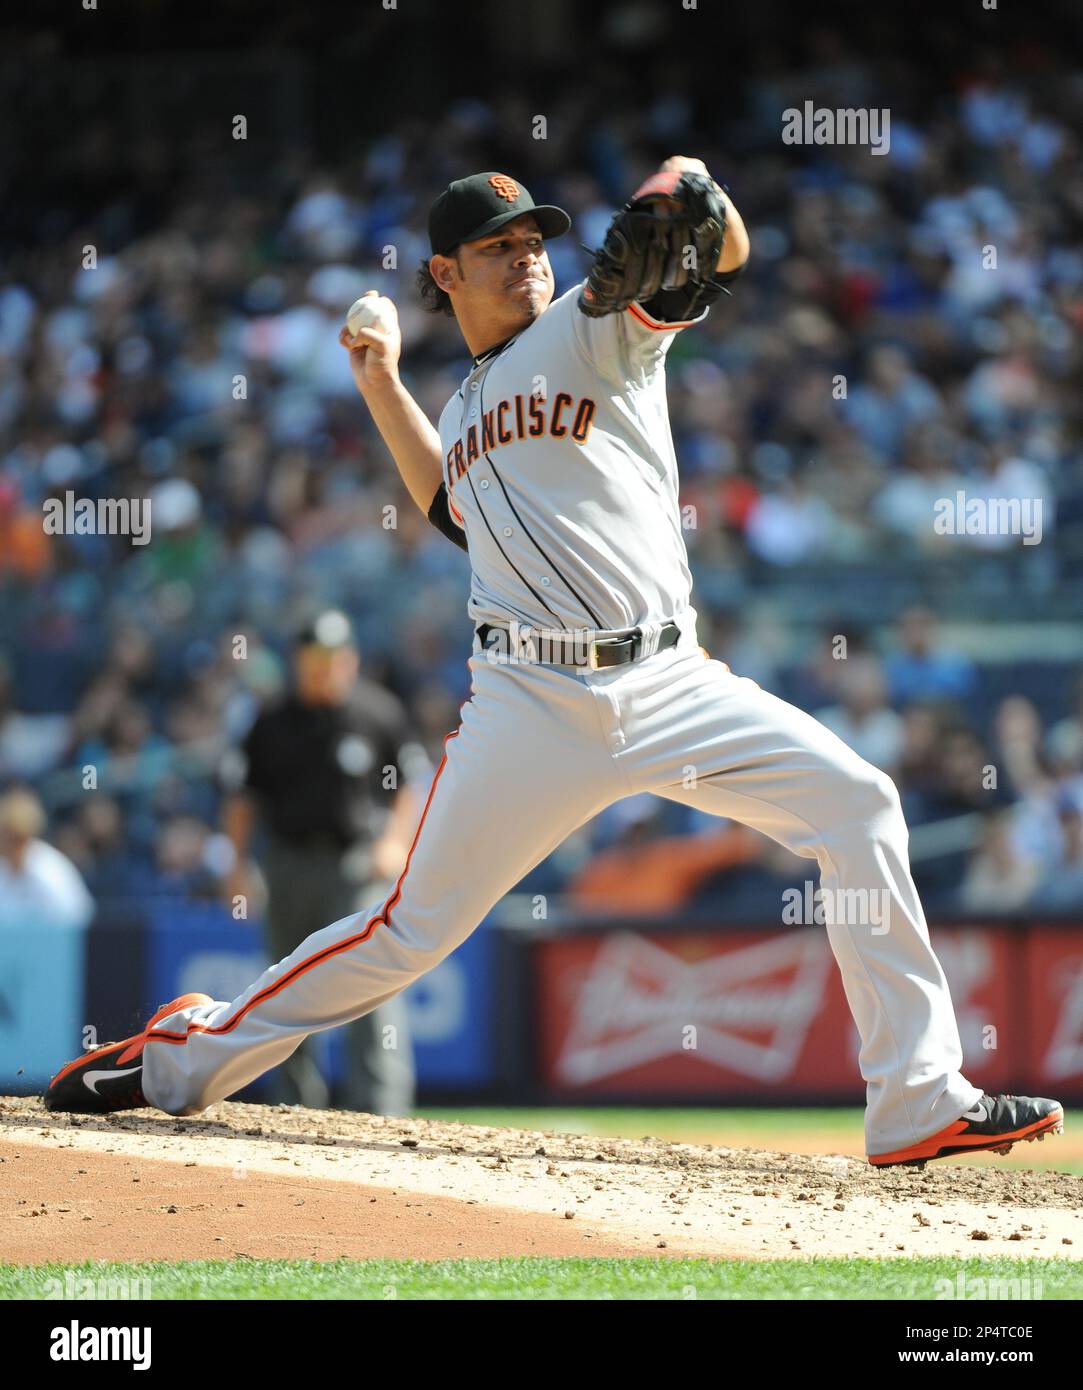 San Francisco Giants pitcher Guillermo Moscoso (34) during game against the  New York Yankees at Yankee Stadium in Bronx, New York; September 21, 2013.  Yankees defeated Giants 6-0. (AP Photo/Tomasso DeRosa Stock Photo - Alamy